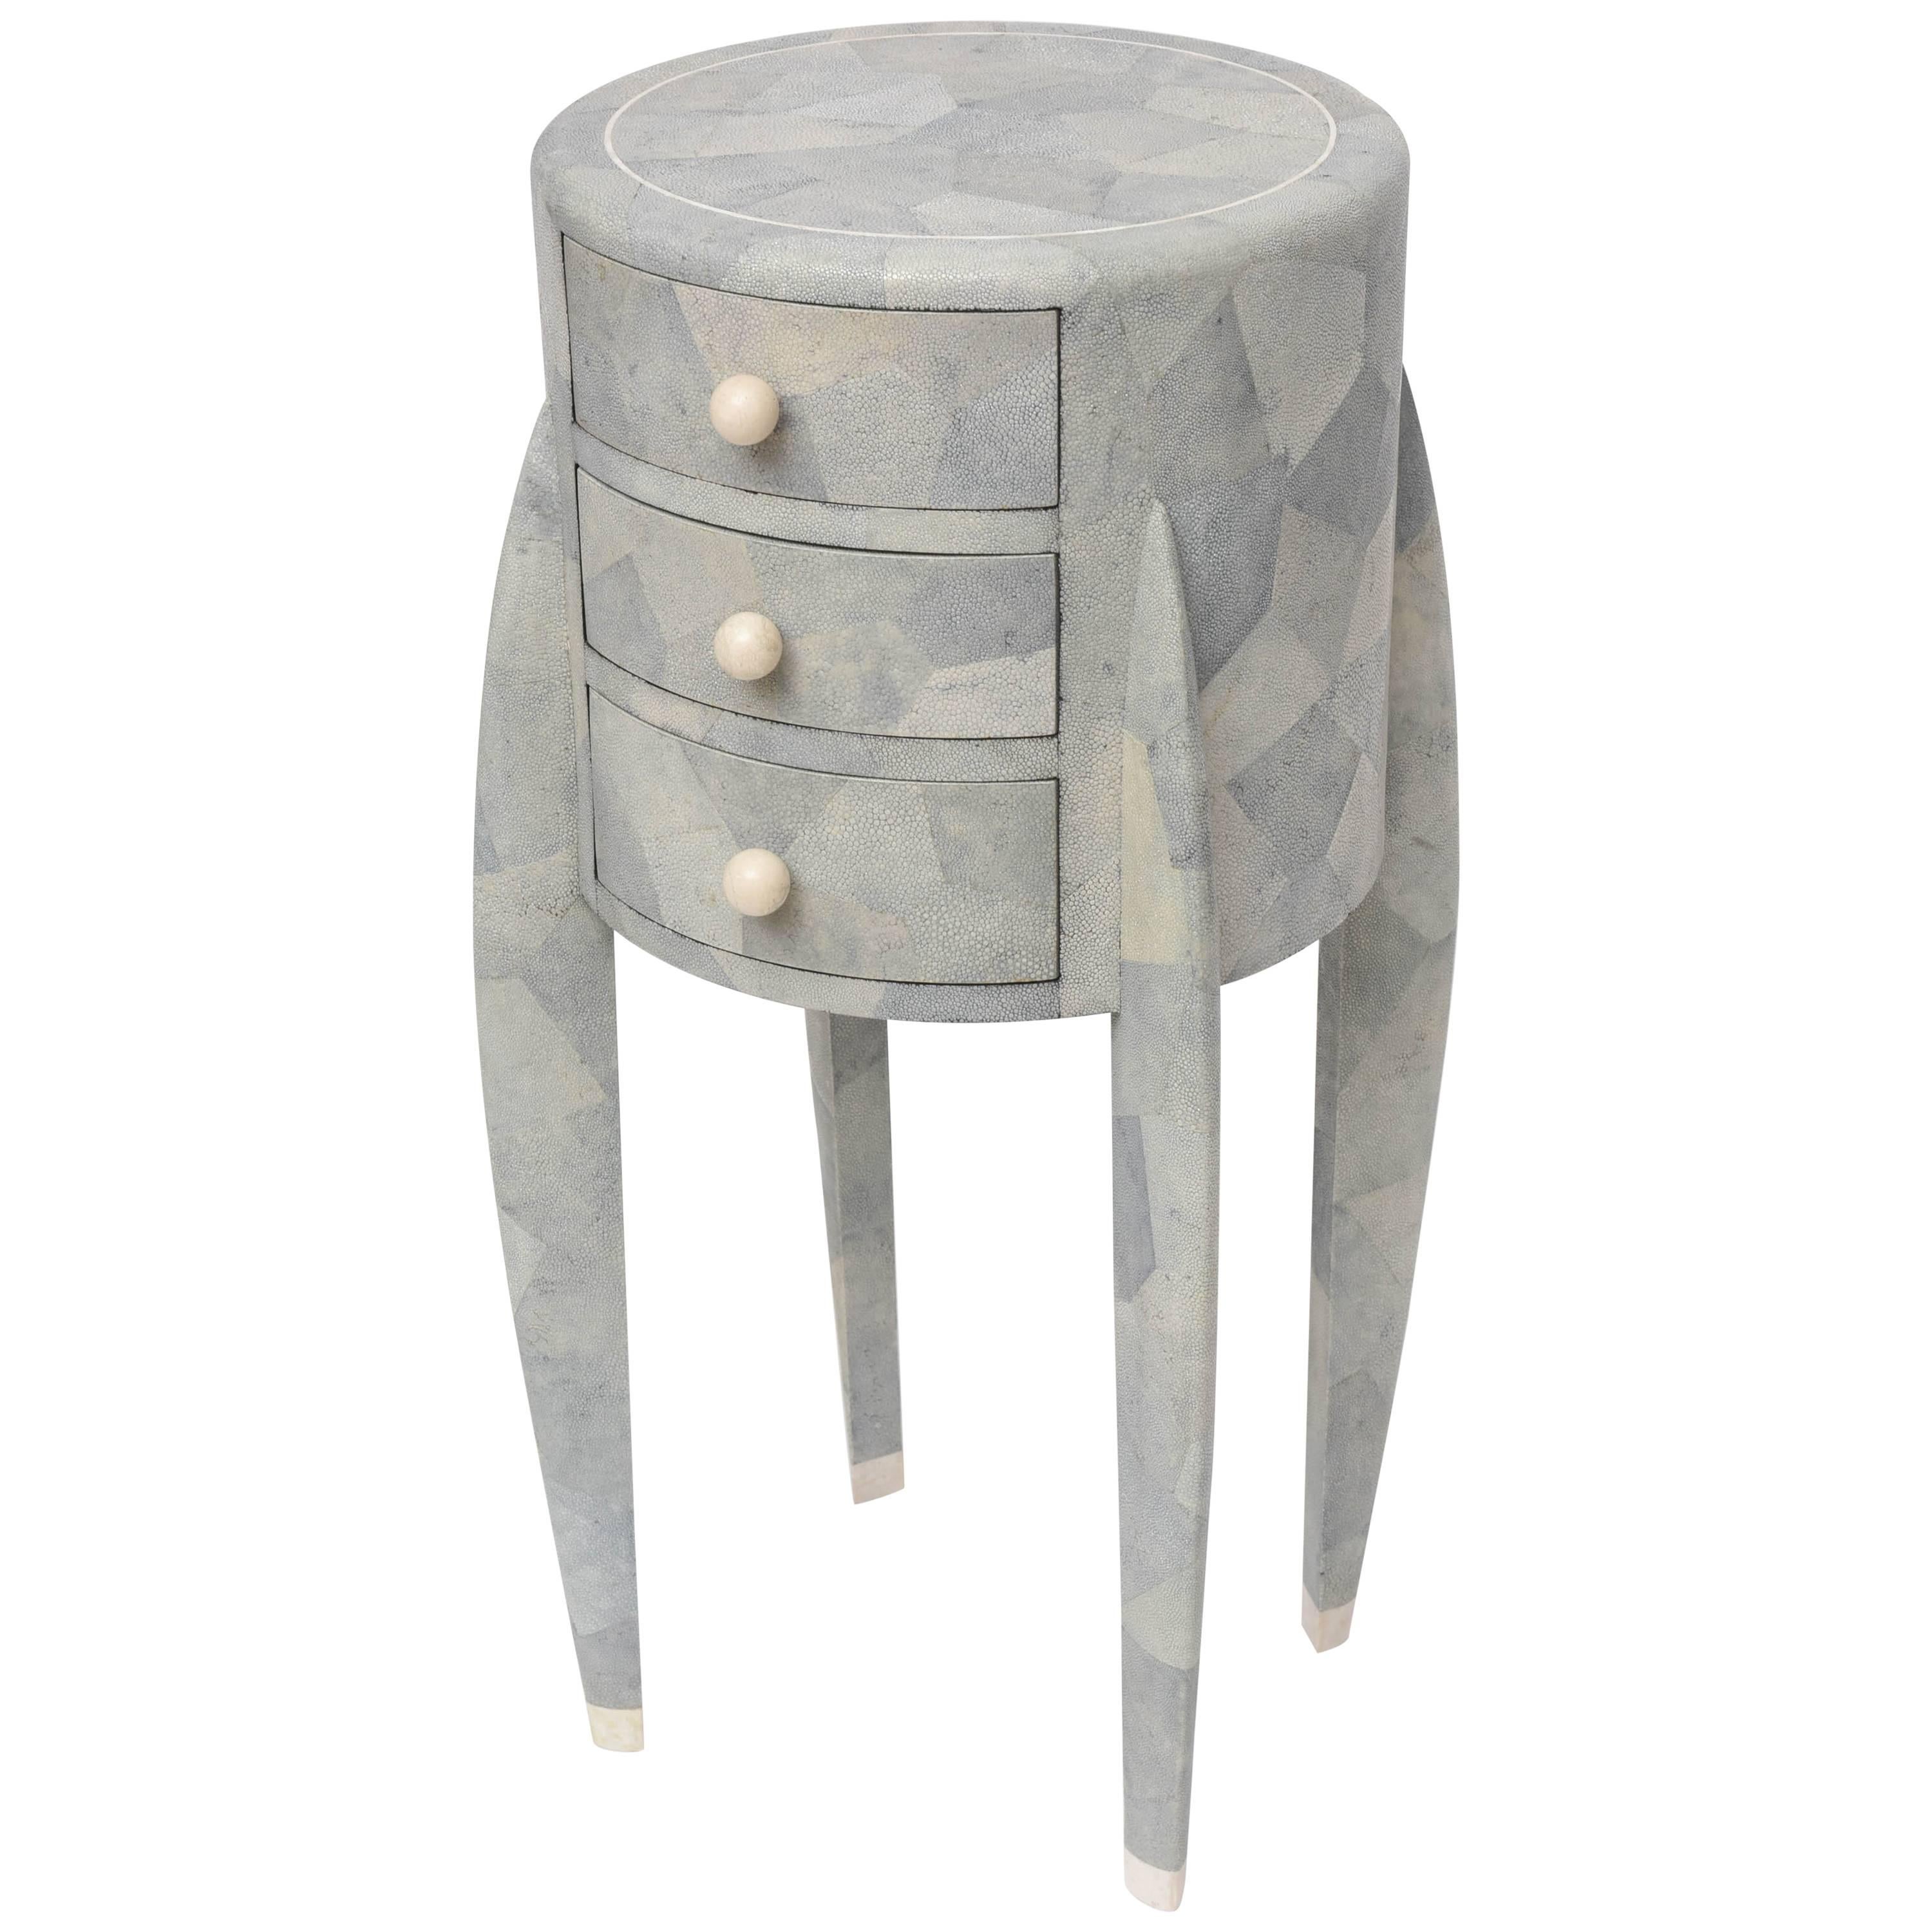 Diminutive Shagreen Chest of Drawers by Maitland-Smith